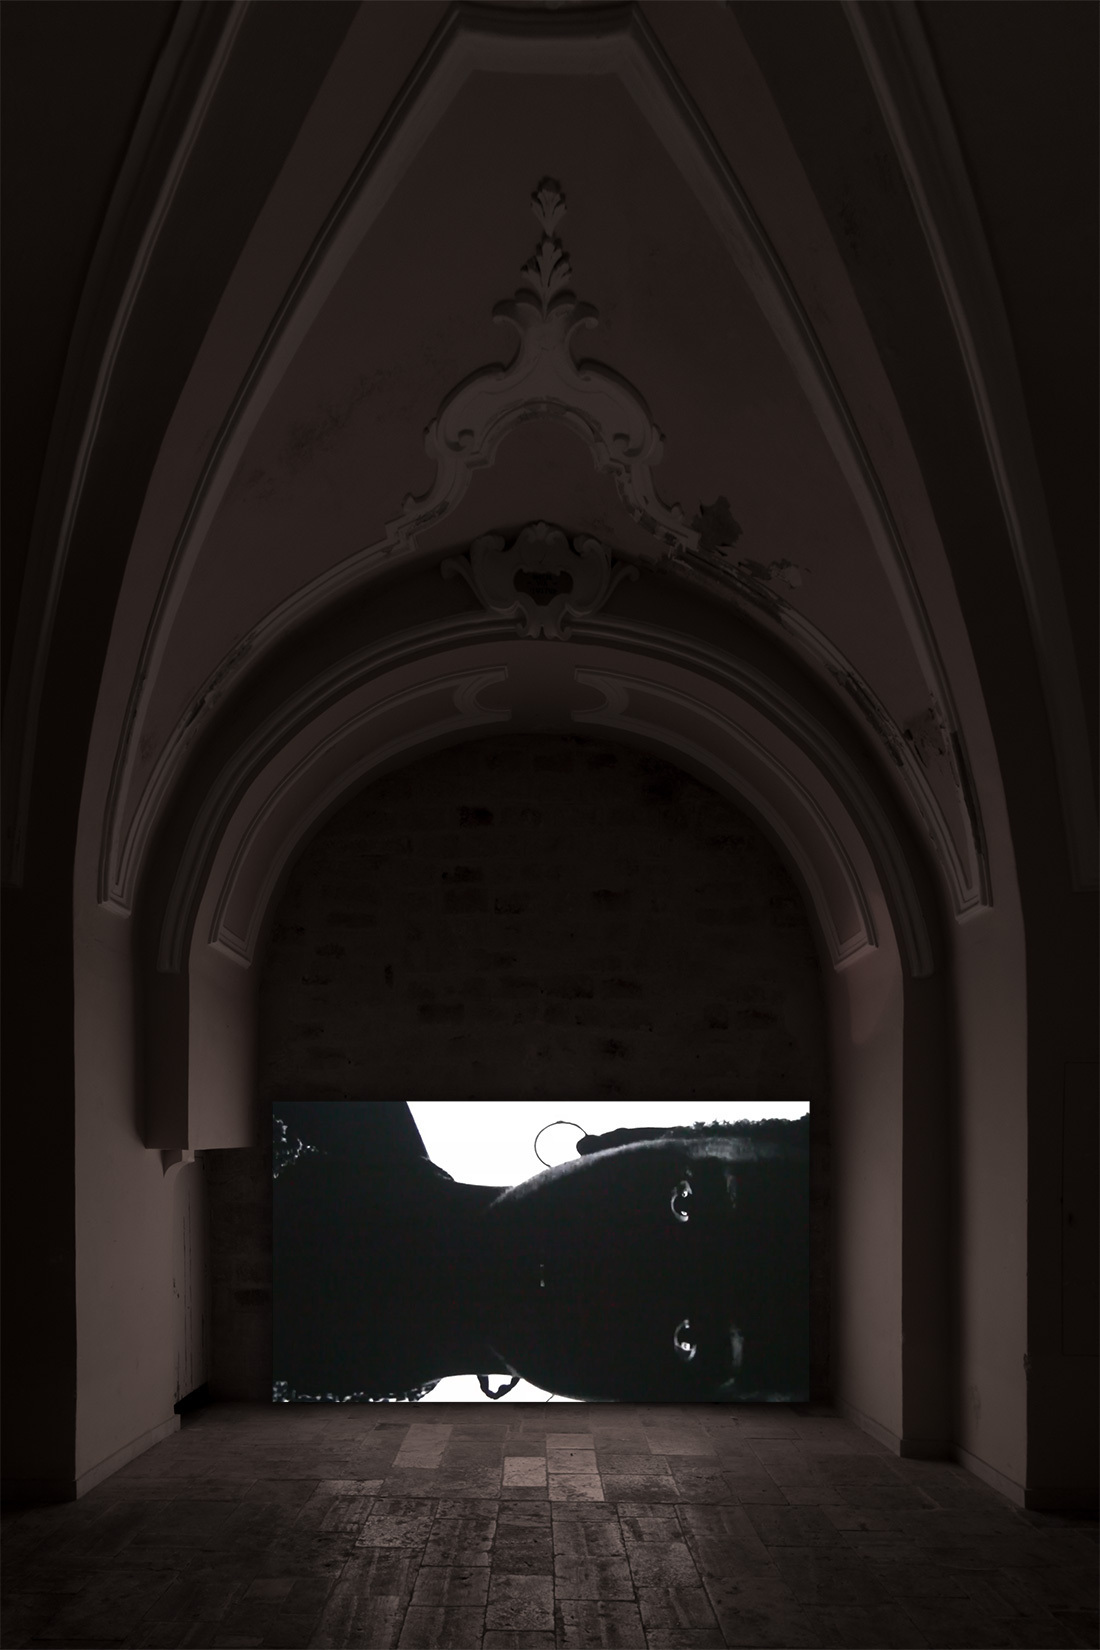 Sondra Perry, Black Girl As A Landscape, 2010 – Installation view.